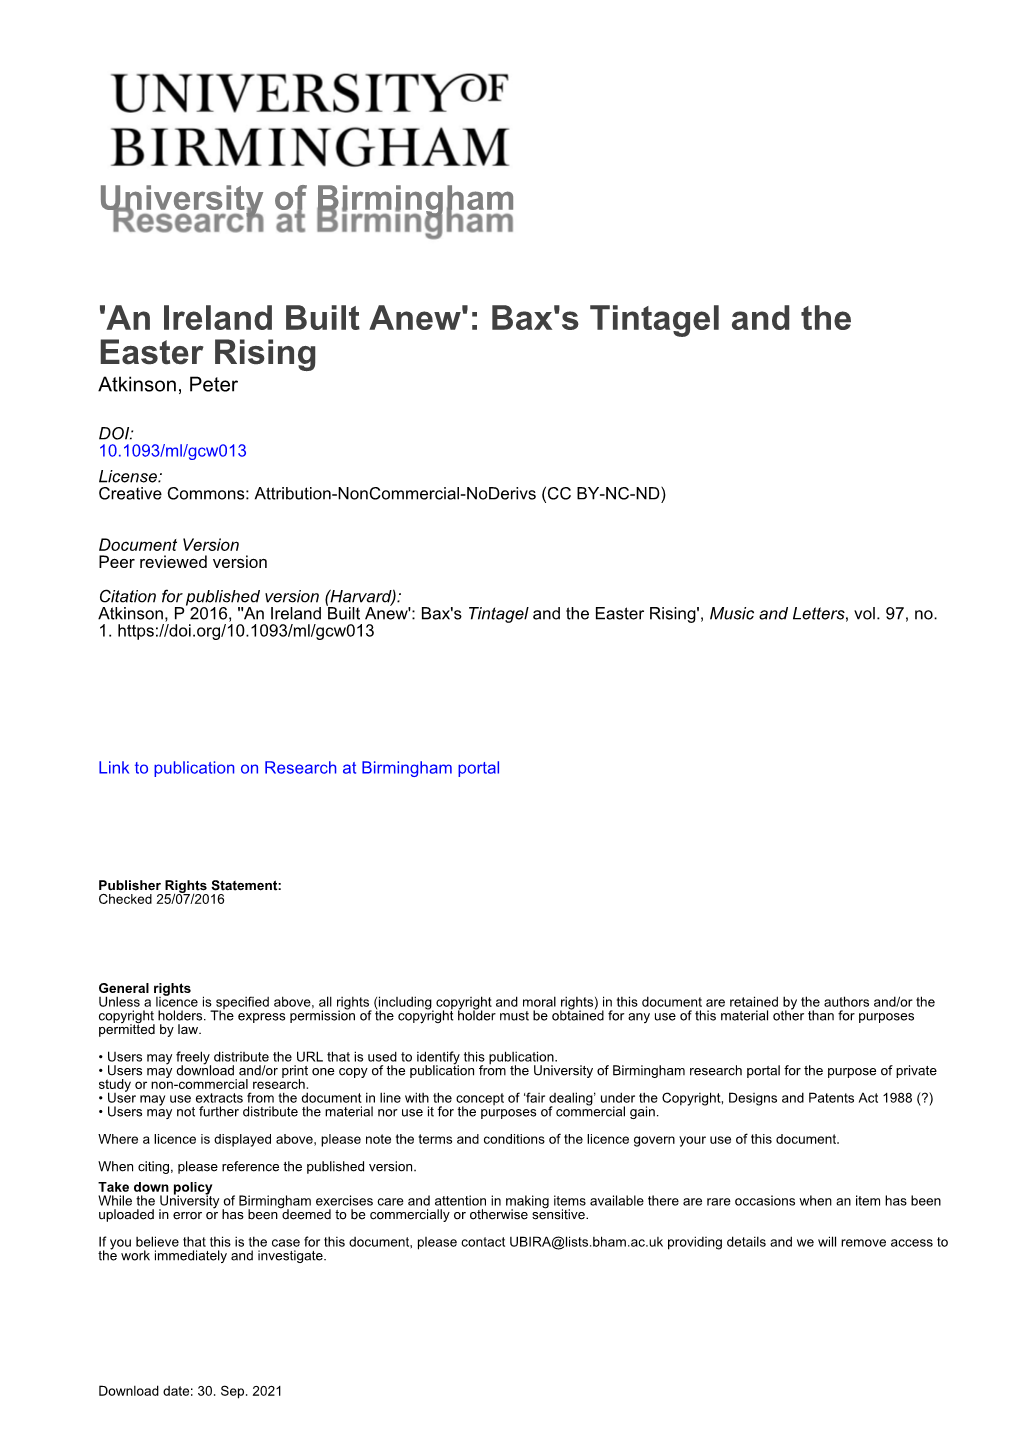 'An Ireland Built Anew': Bax's Tintagel and the Easter Rising Atkinson, Peter